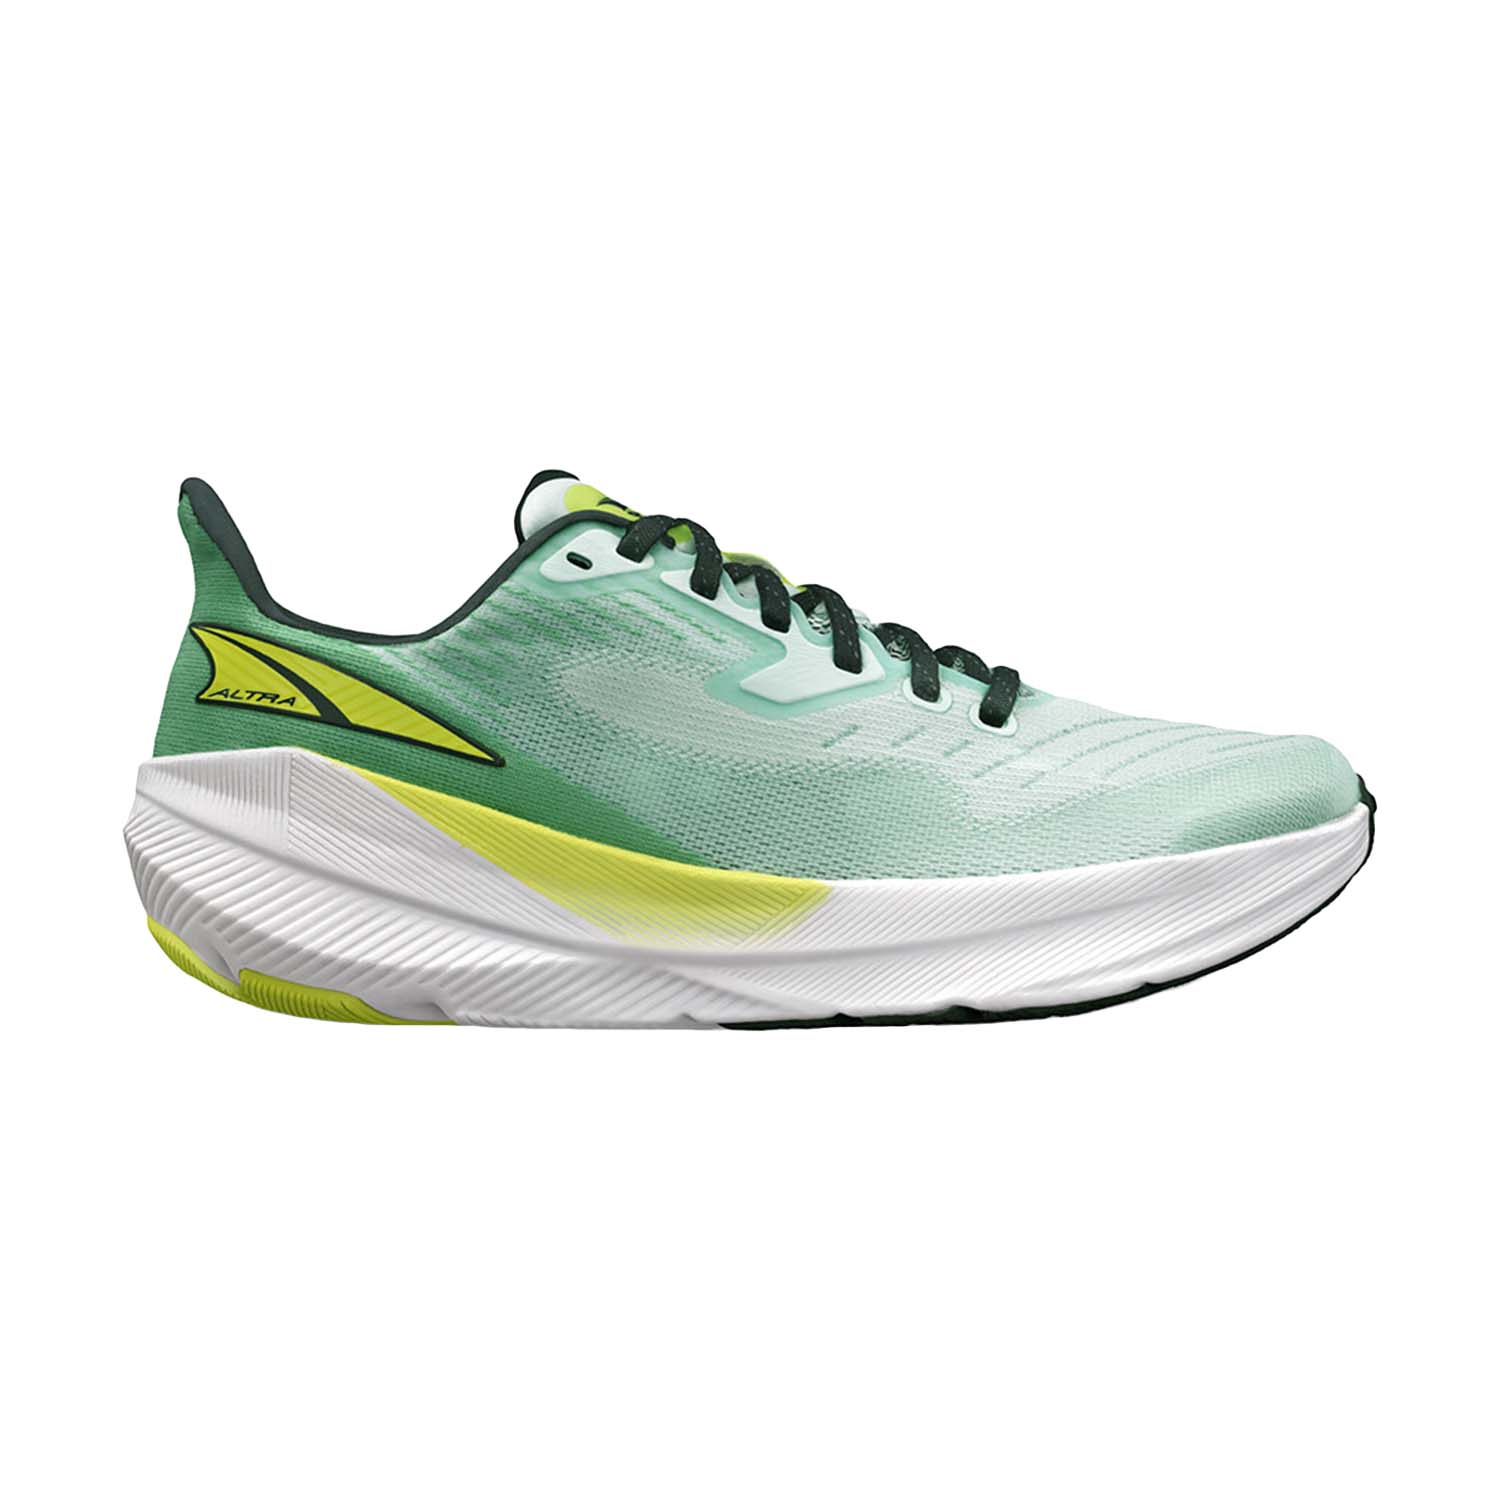 Altra Experience Flow - Mint